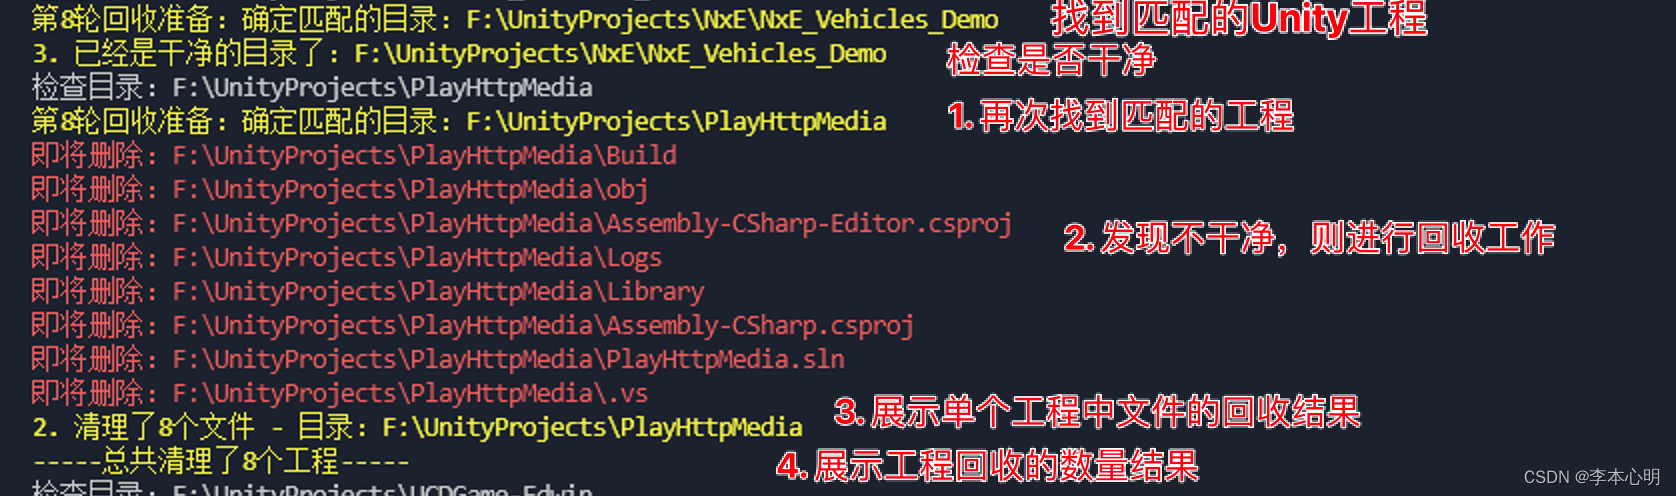 <span style='color:red;'>Python</span>工具-<span style='color:red;'>清理</span>Unity(批量深度)<span style='color:red;'>清理</span>U3D<span style='color:red;'>项目</span>工程保留关键工程<span style='color:red;'>文件</span>